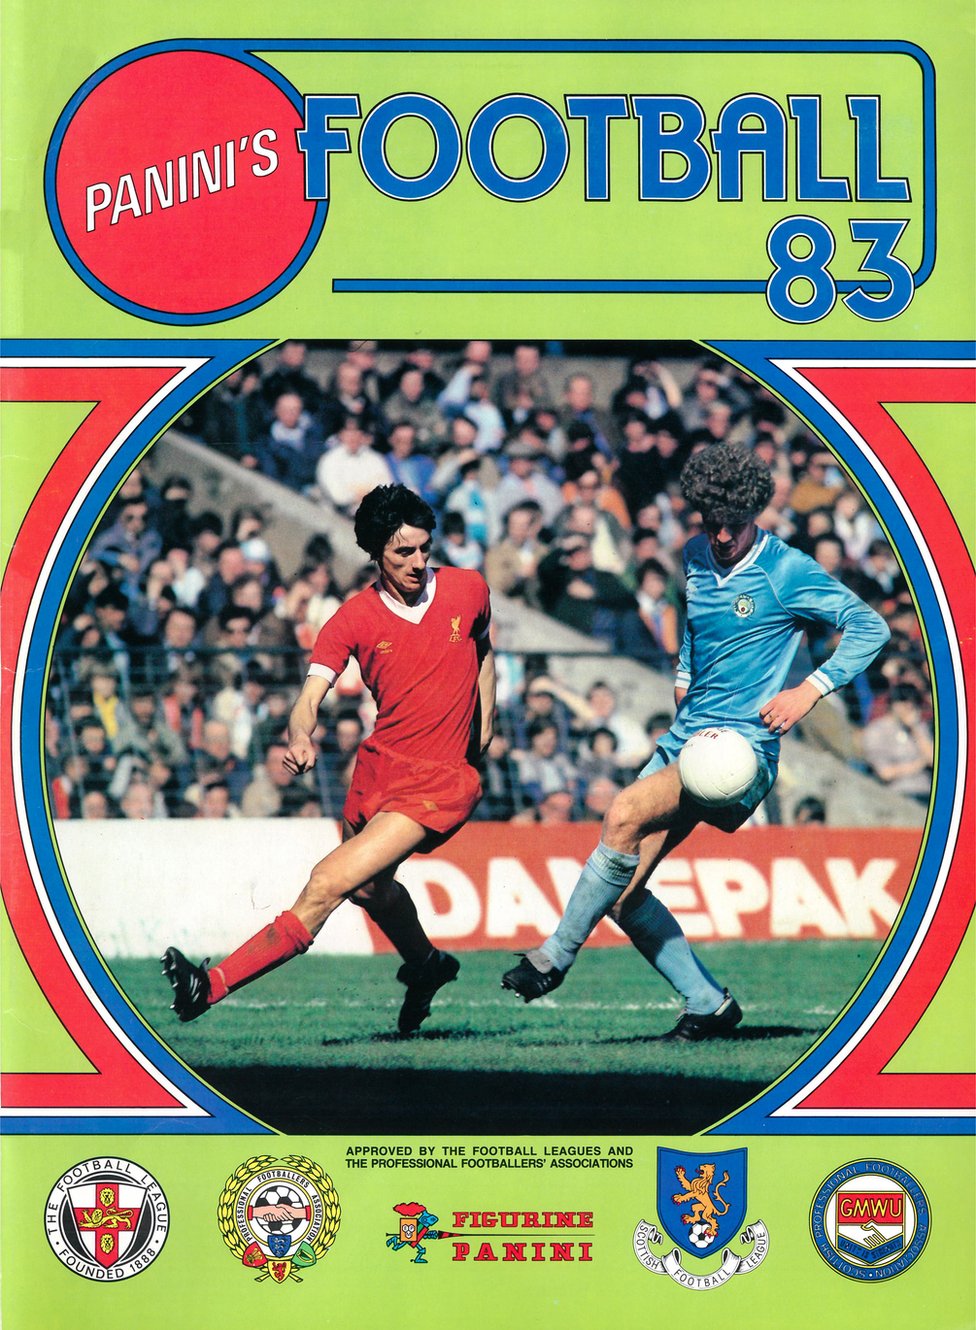 The front cover of Panini's 1983 football sticker album